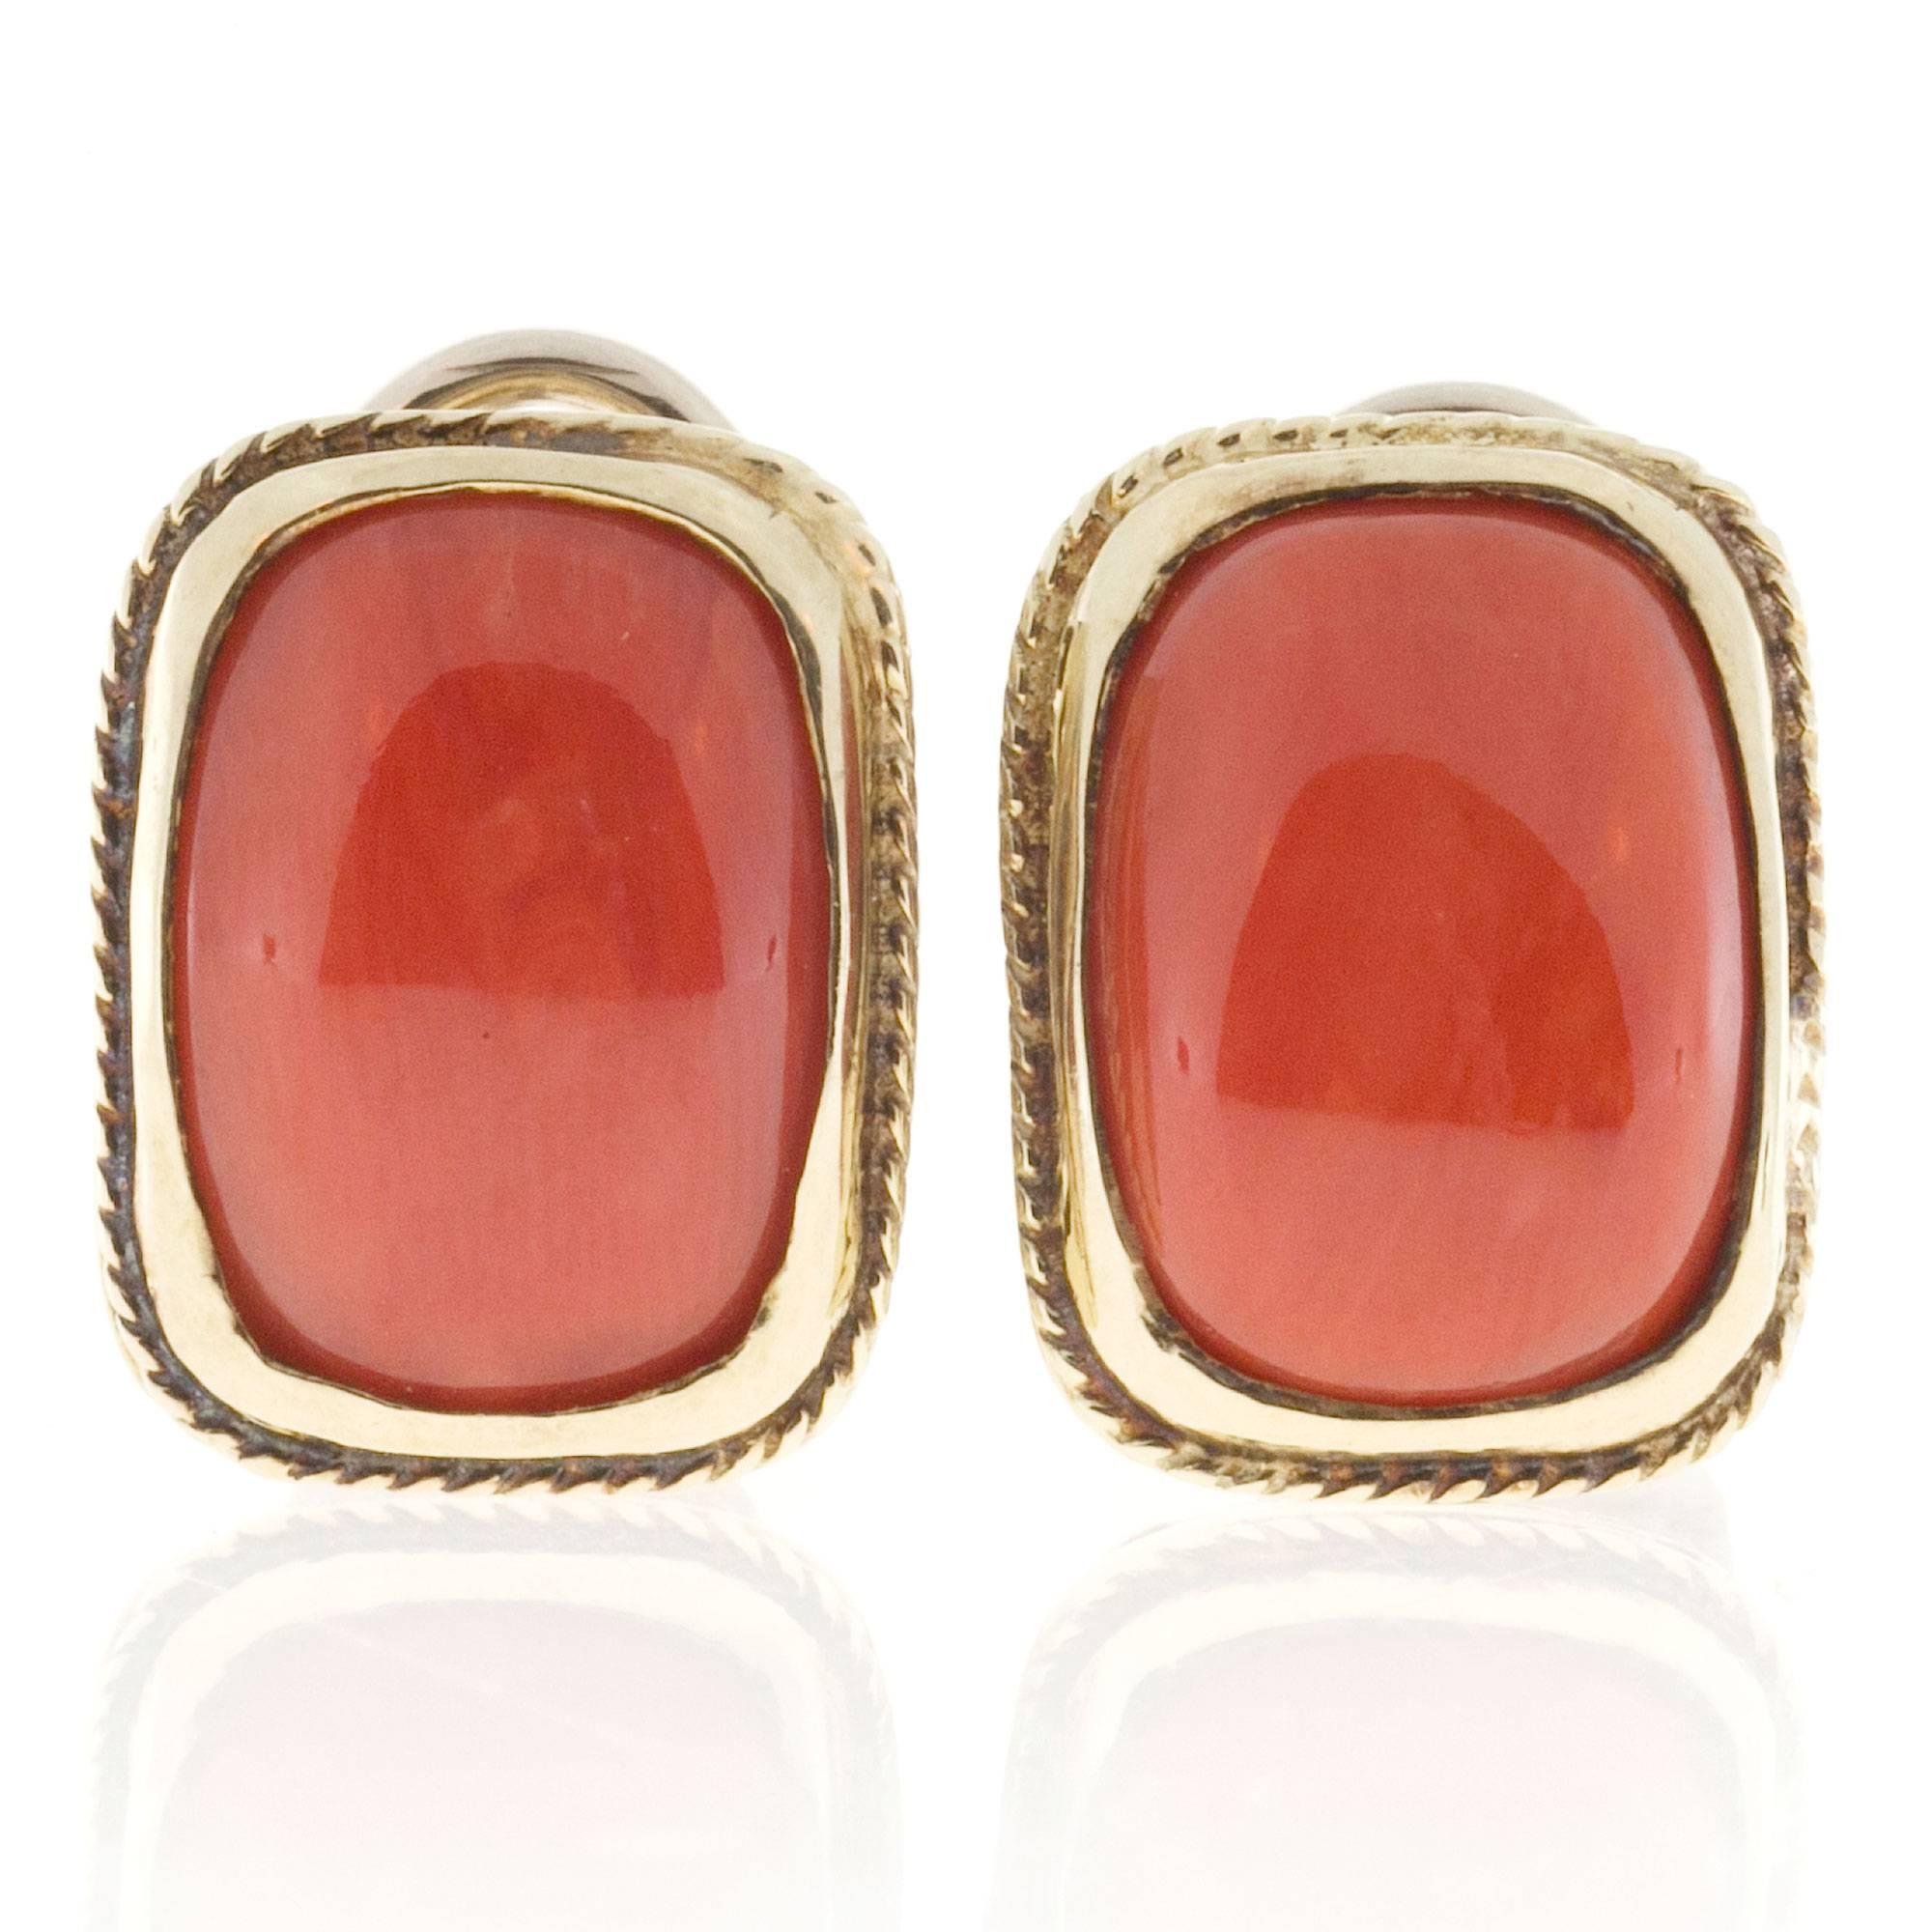 Top gem orange well-polished untreated Coral set in hand made clip post earrings with pierced galleries.  Pierced side gallery and under gallery.

2 Natural orange Coral untreated 13.3 x 9.5mm
14k Yellow Gold
Stamped: 14k Italy
10.4